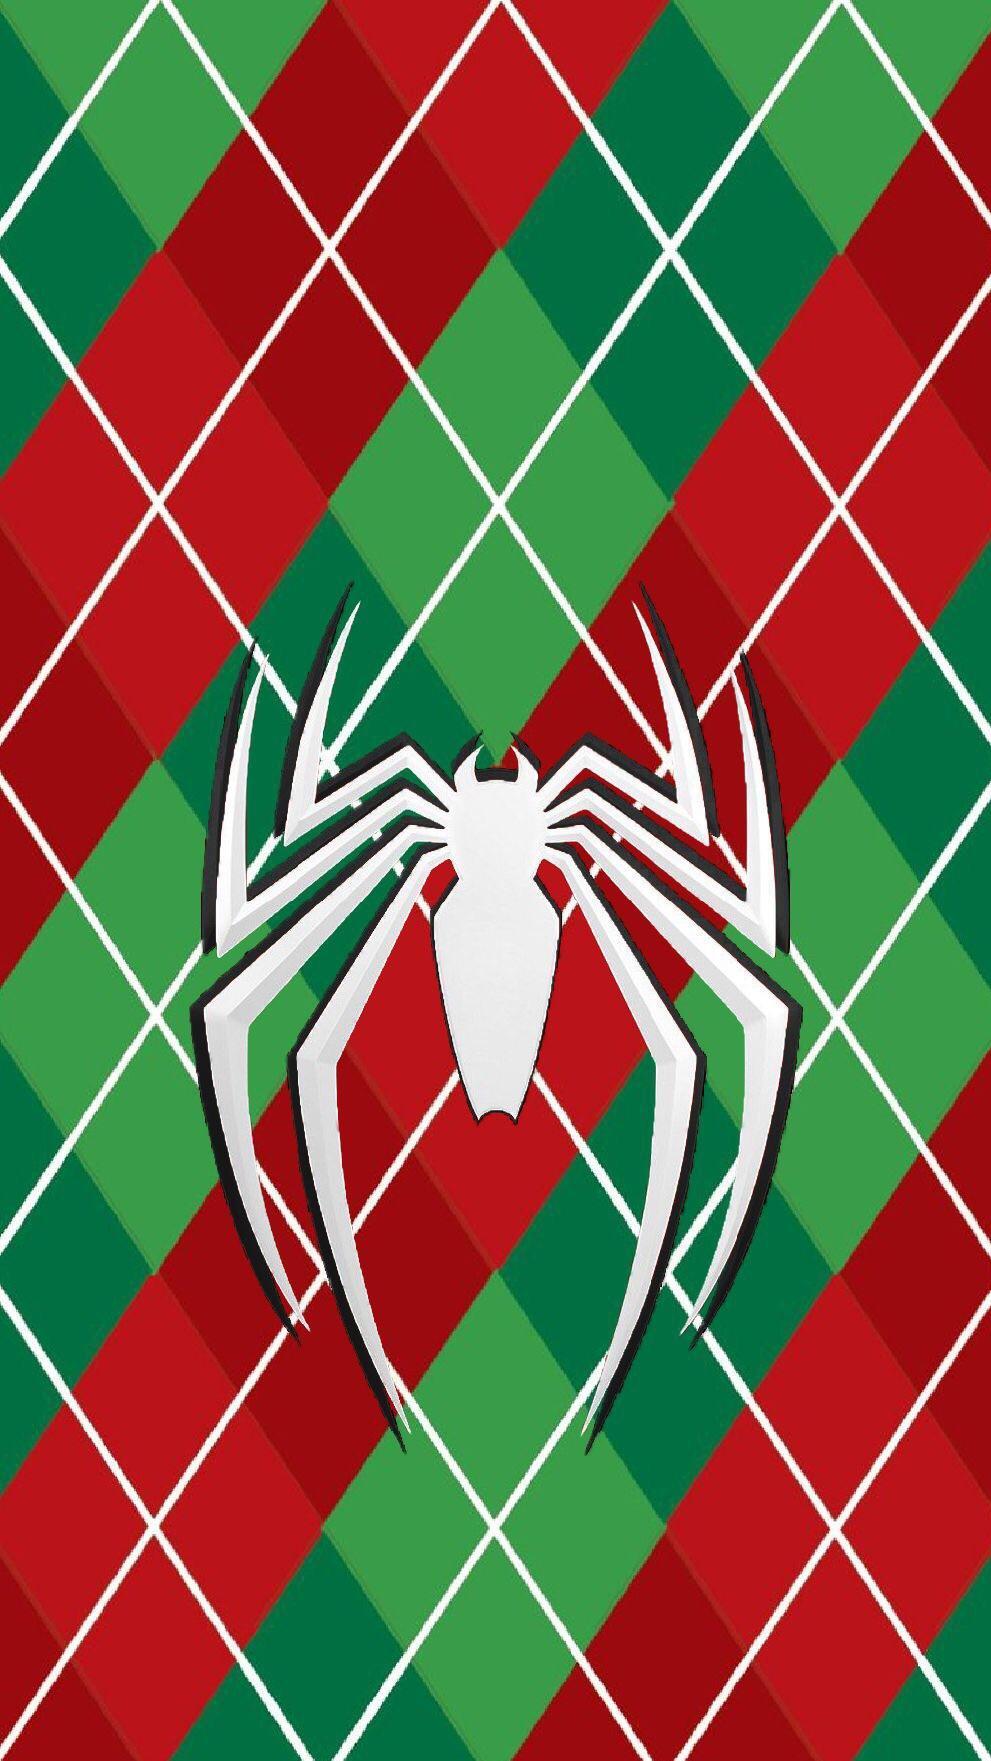 A Spider Man Ps4 Christmas Themed Phone Wallpaper I Made Enjoy